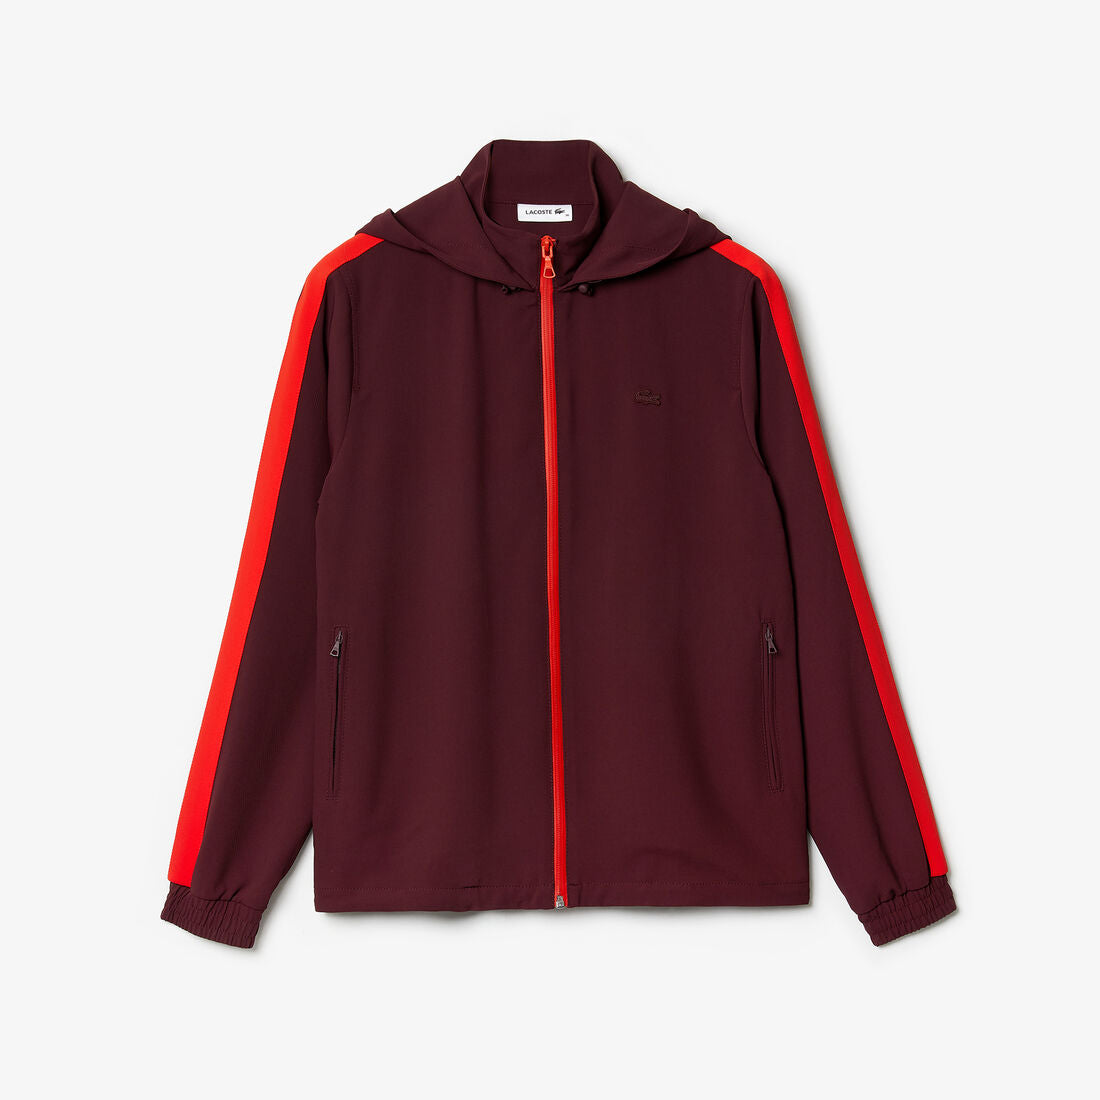 Shop The Latest Collection Of Outlet - Lacoste Women’S Hooded Zip Sweatshirt - Sf6622 In Lebanon